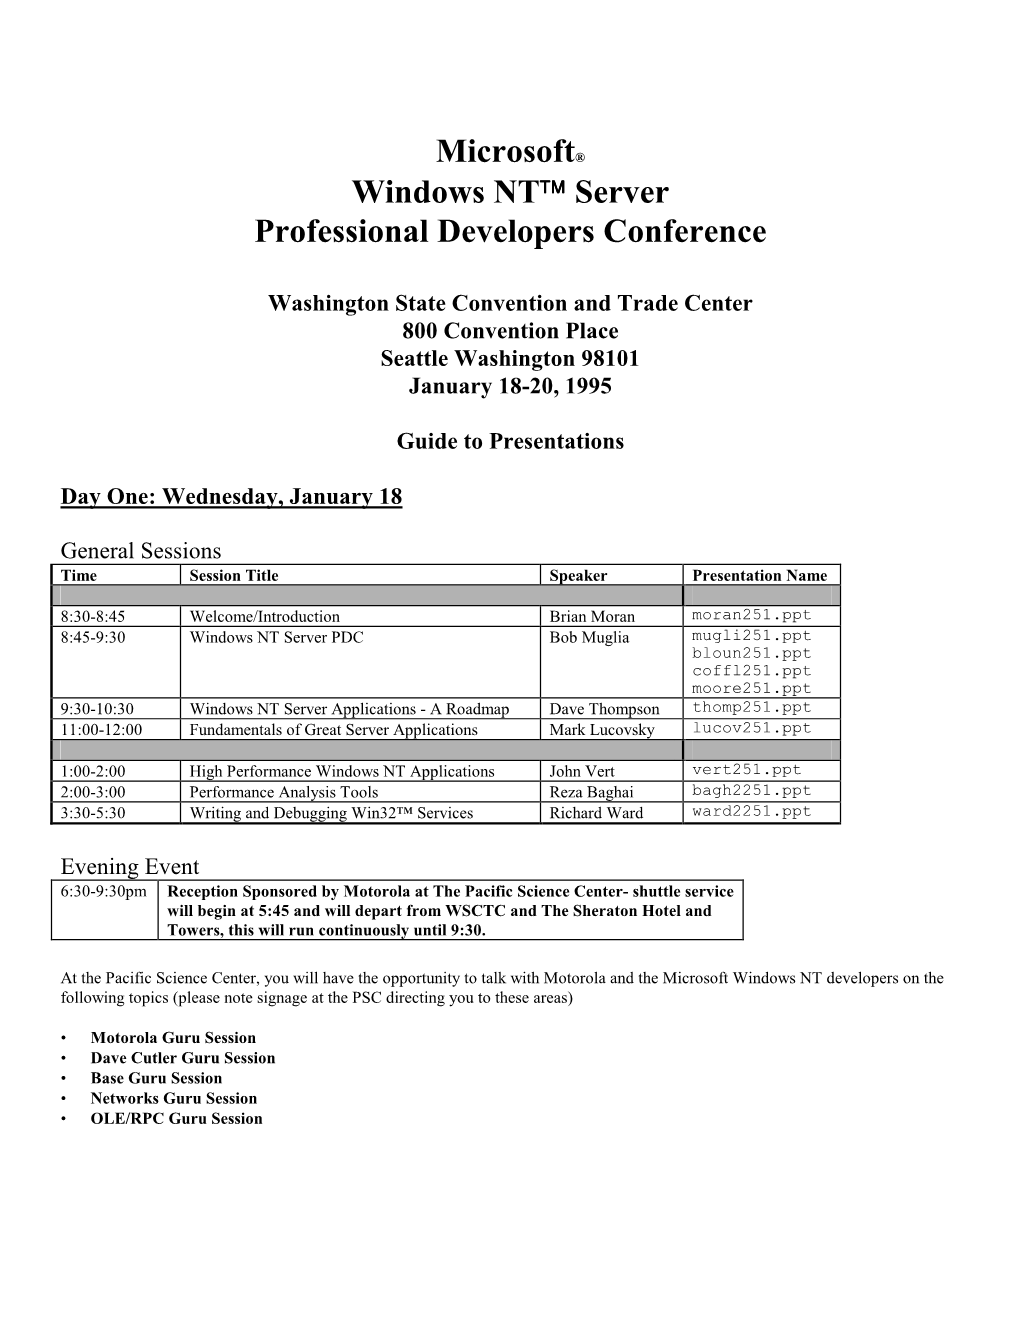 Microsoft Windows NT Server Professional Developers Conference